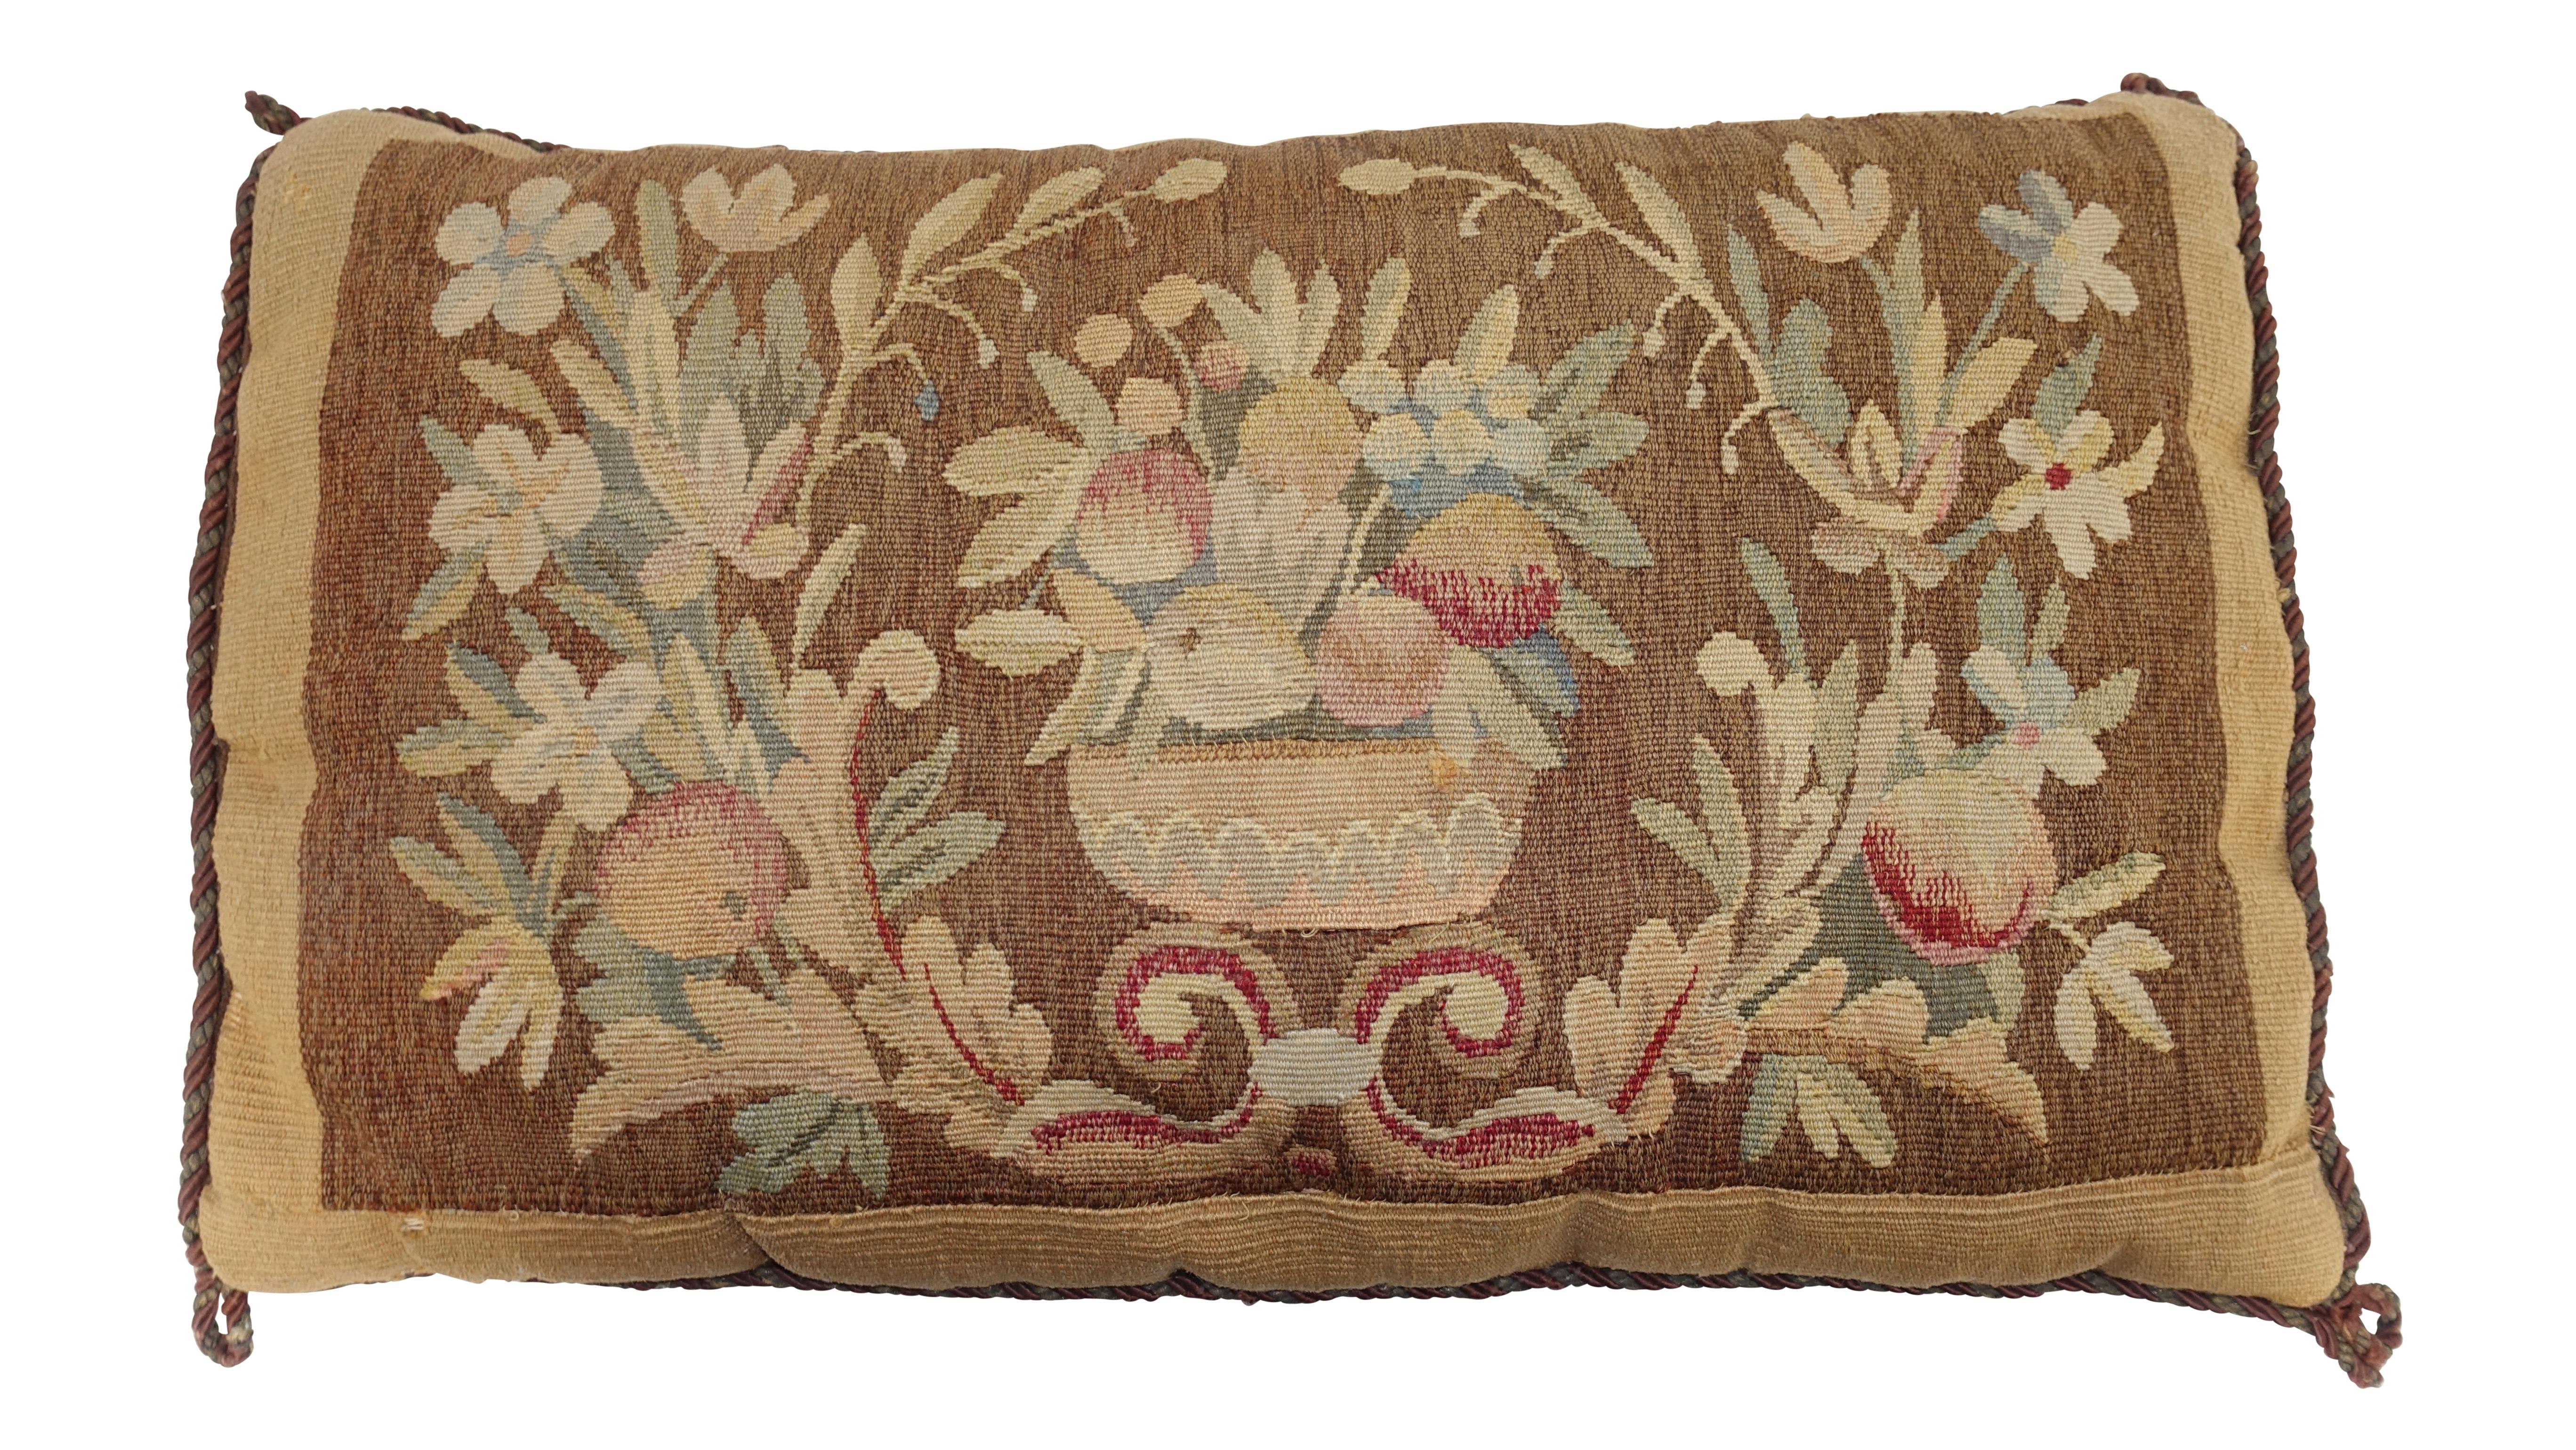 Antique tapestry fragment with basket of fruit and floral design made into a pillow with down cushion. Continental, early 19th century.
Shows expected light wear and age.